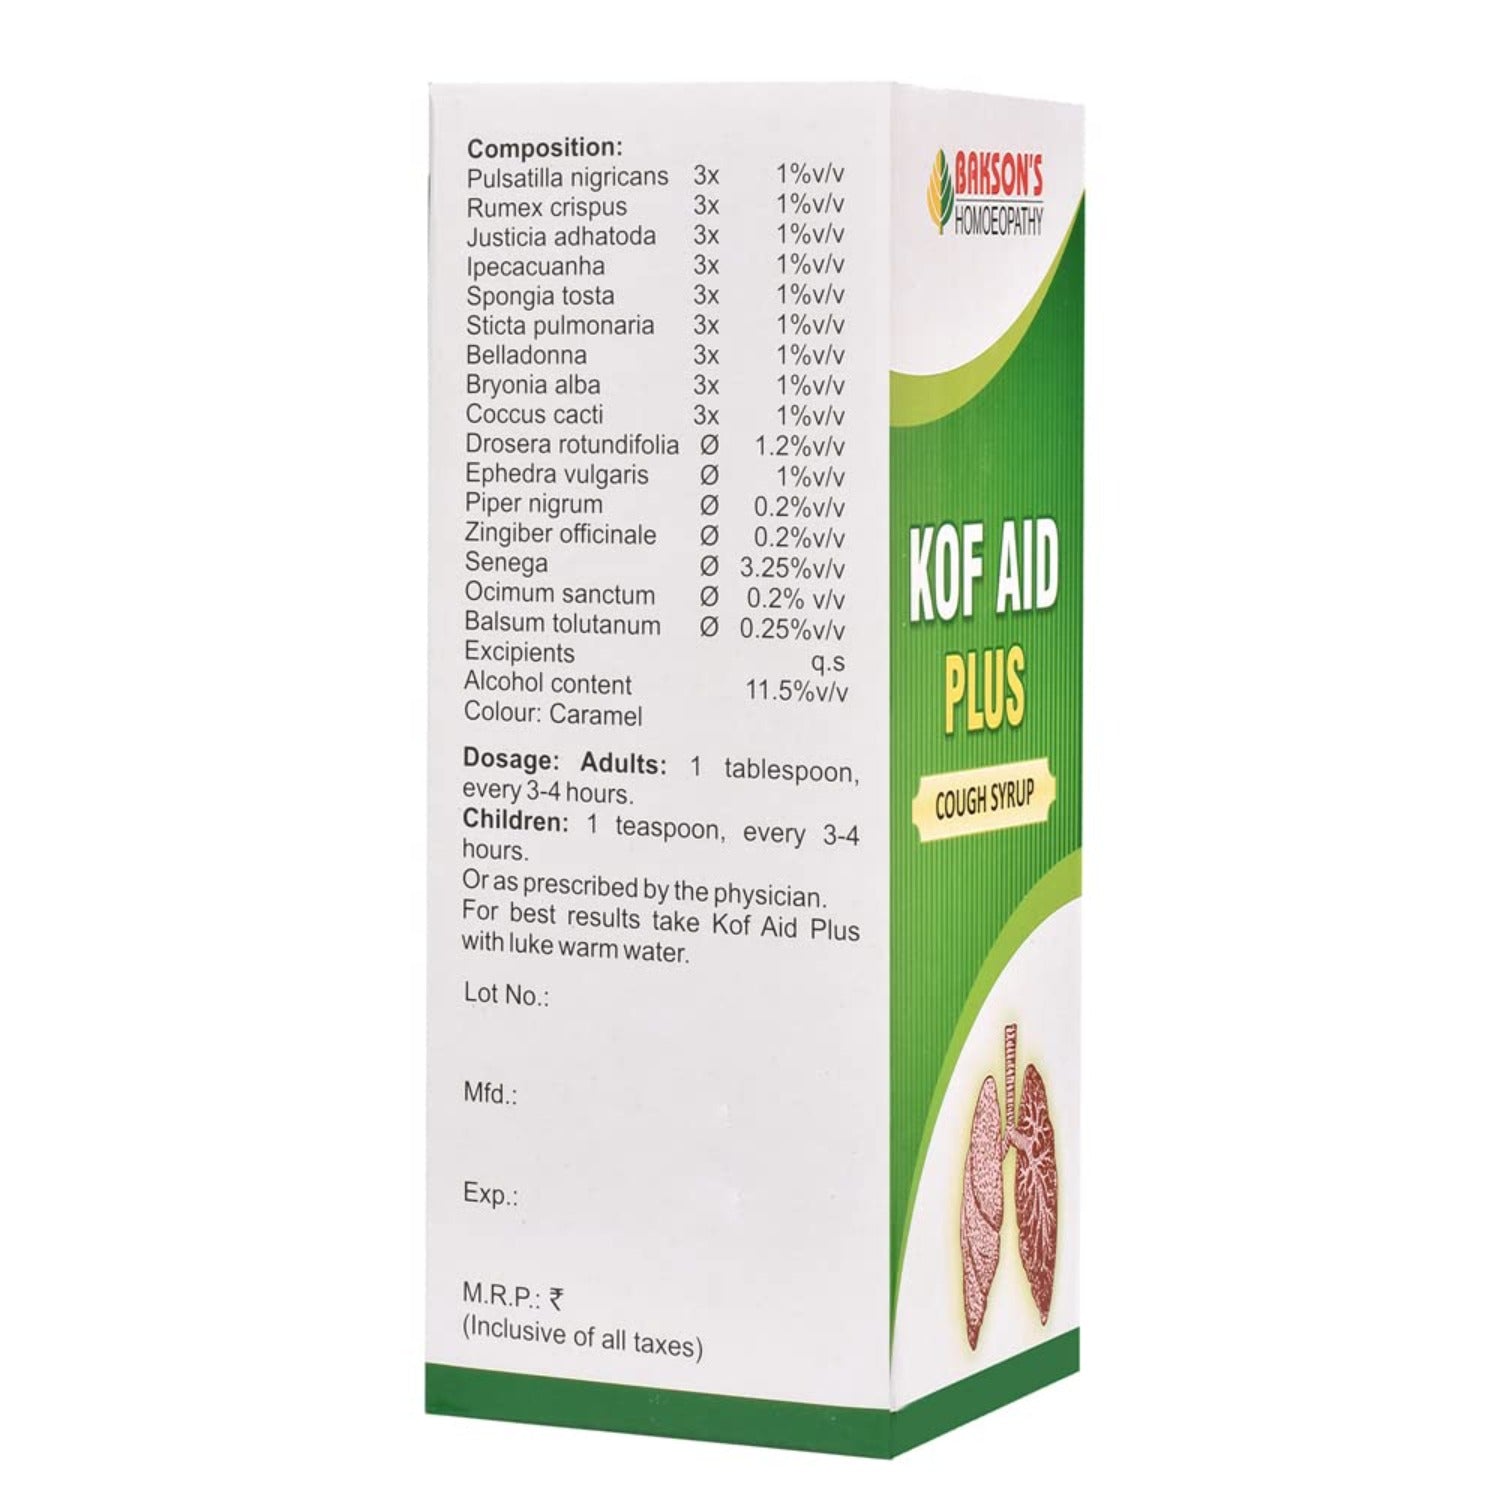 Bakson's Homoeopathy Kof Aid Plus Cough Effective cough reliever Syrup